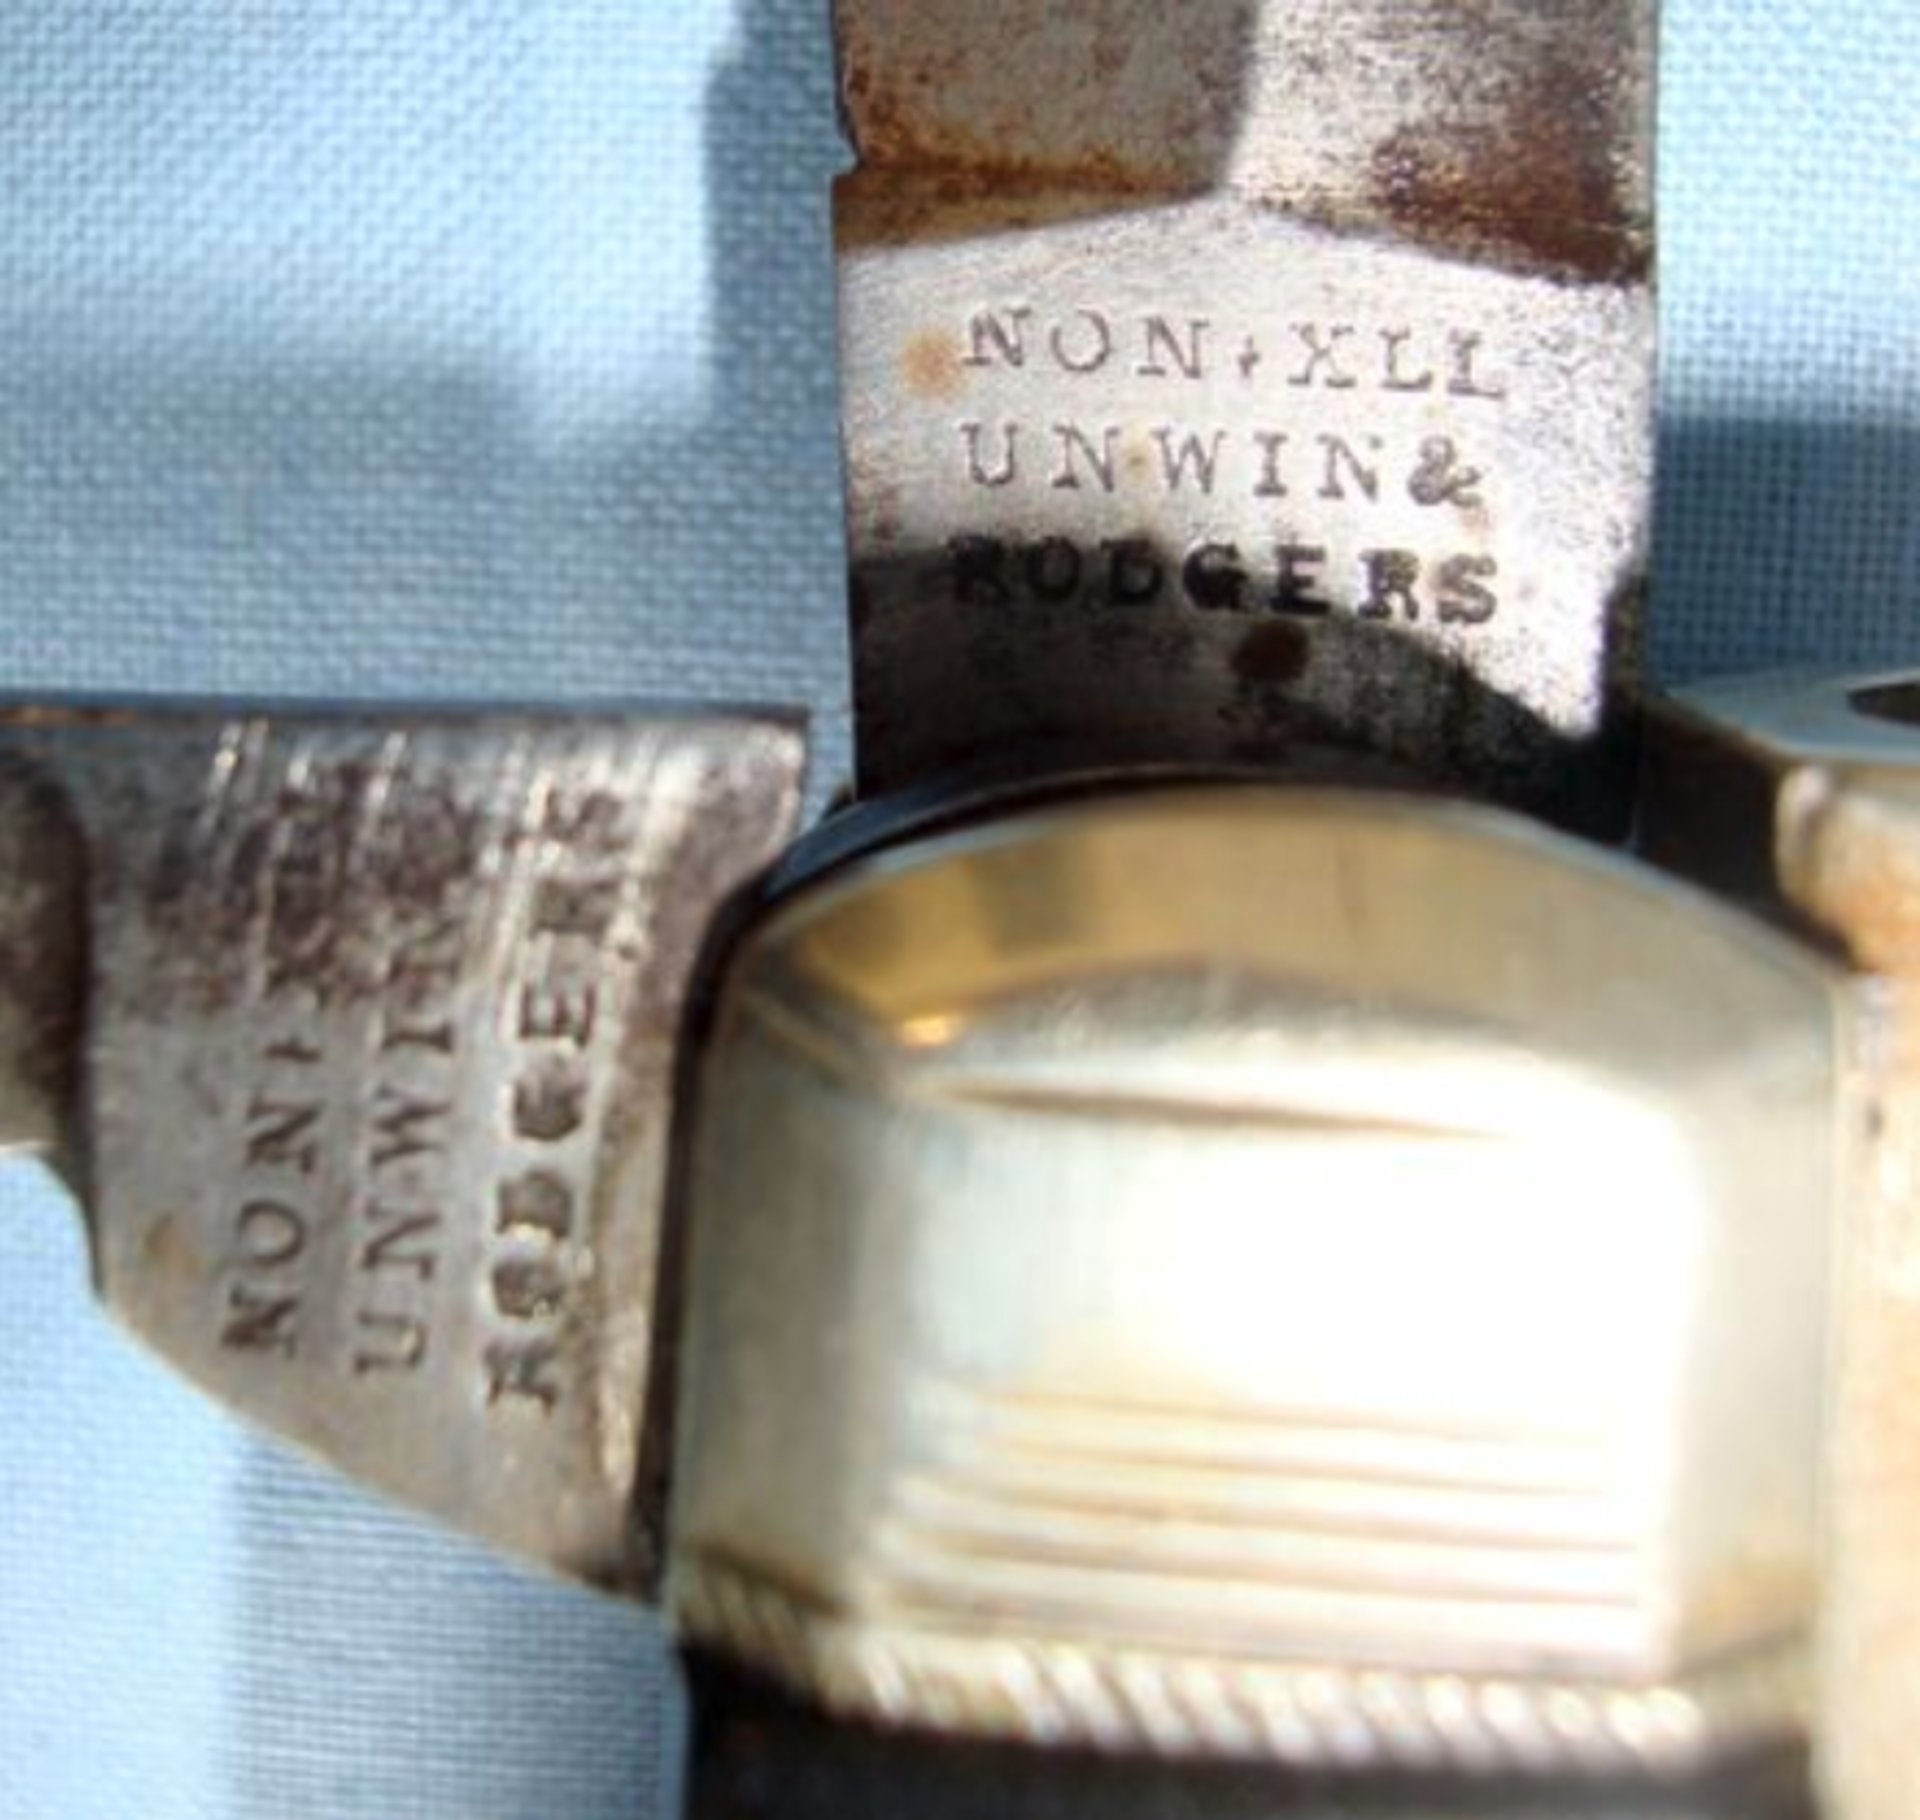 Quality, English, C1850 Unwin & Rodgers Sheffield Patent 'NON* XLL' .26" Bore Percussion knife - Image 2 of 3